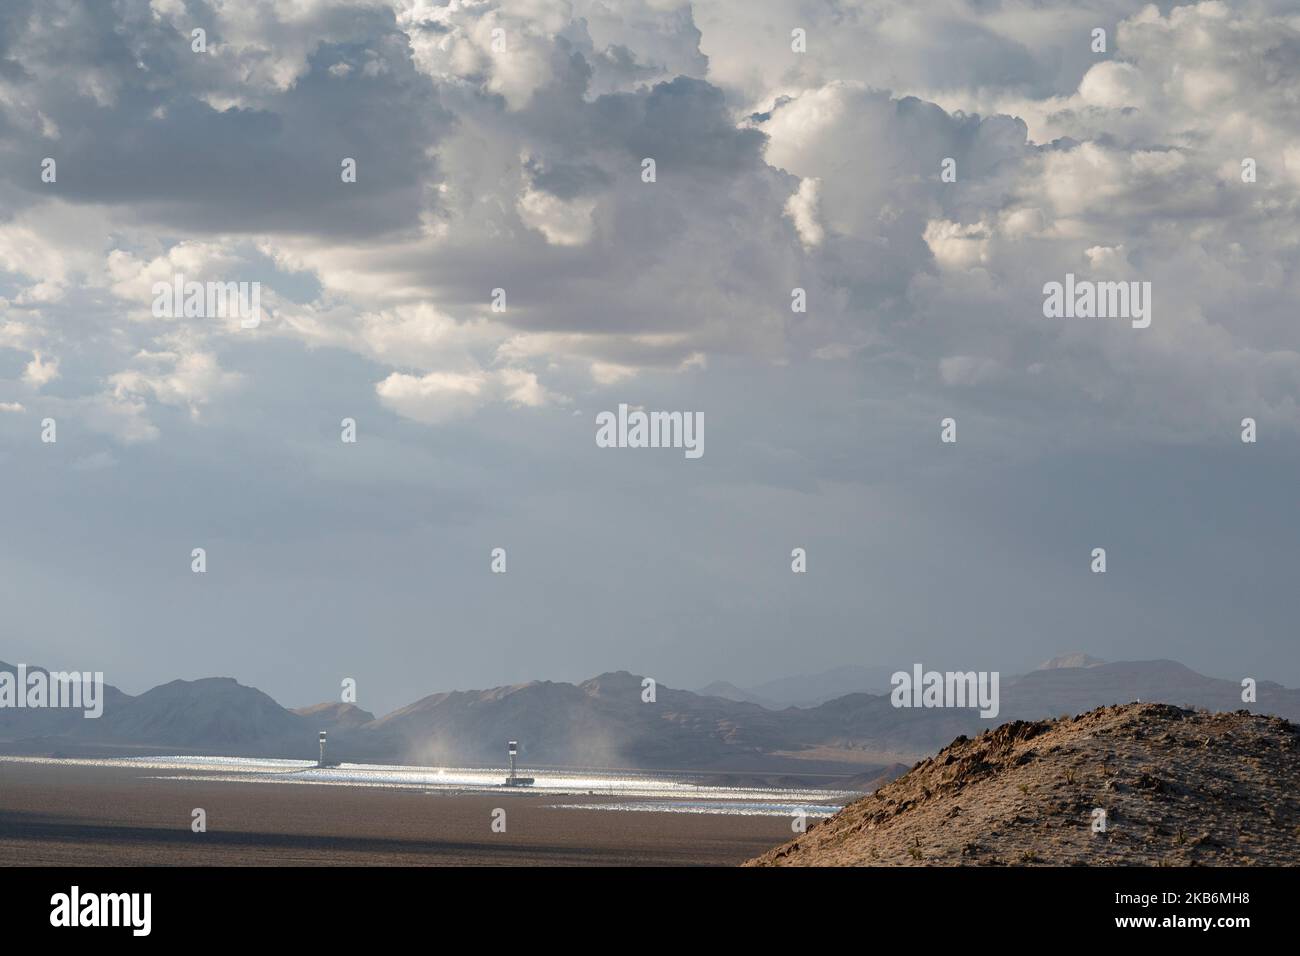 The Ivanpah Solar Electric Generating System outside of Primm, Nevada. Stock Photo